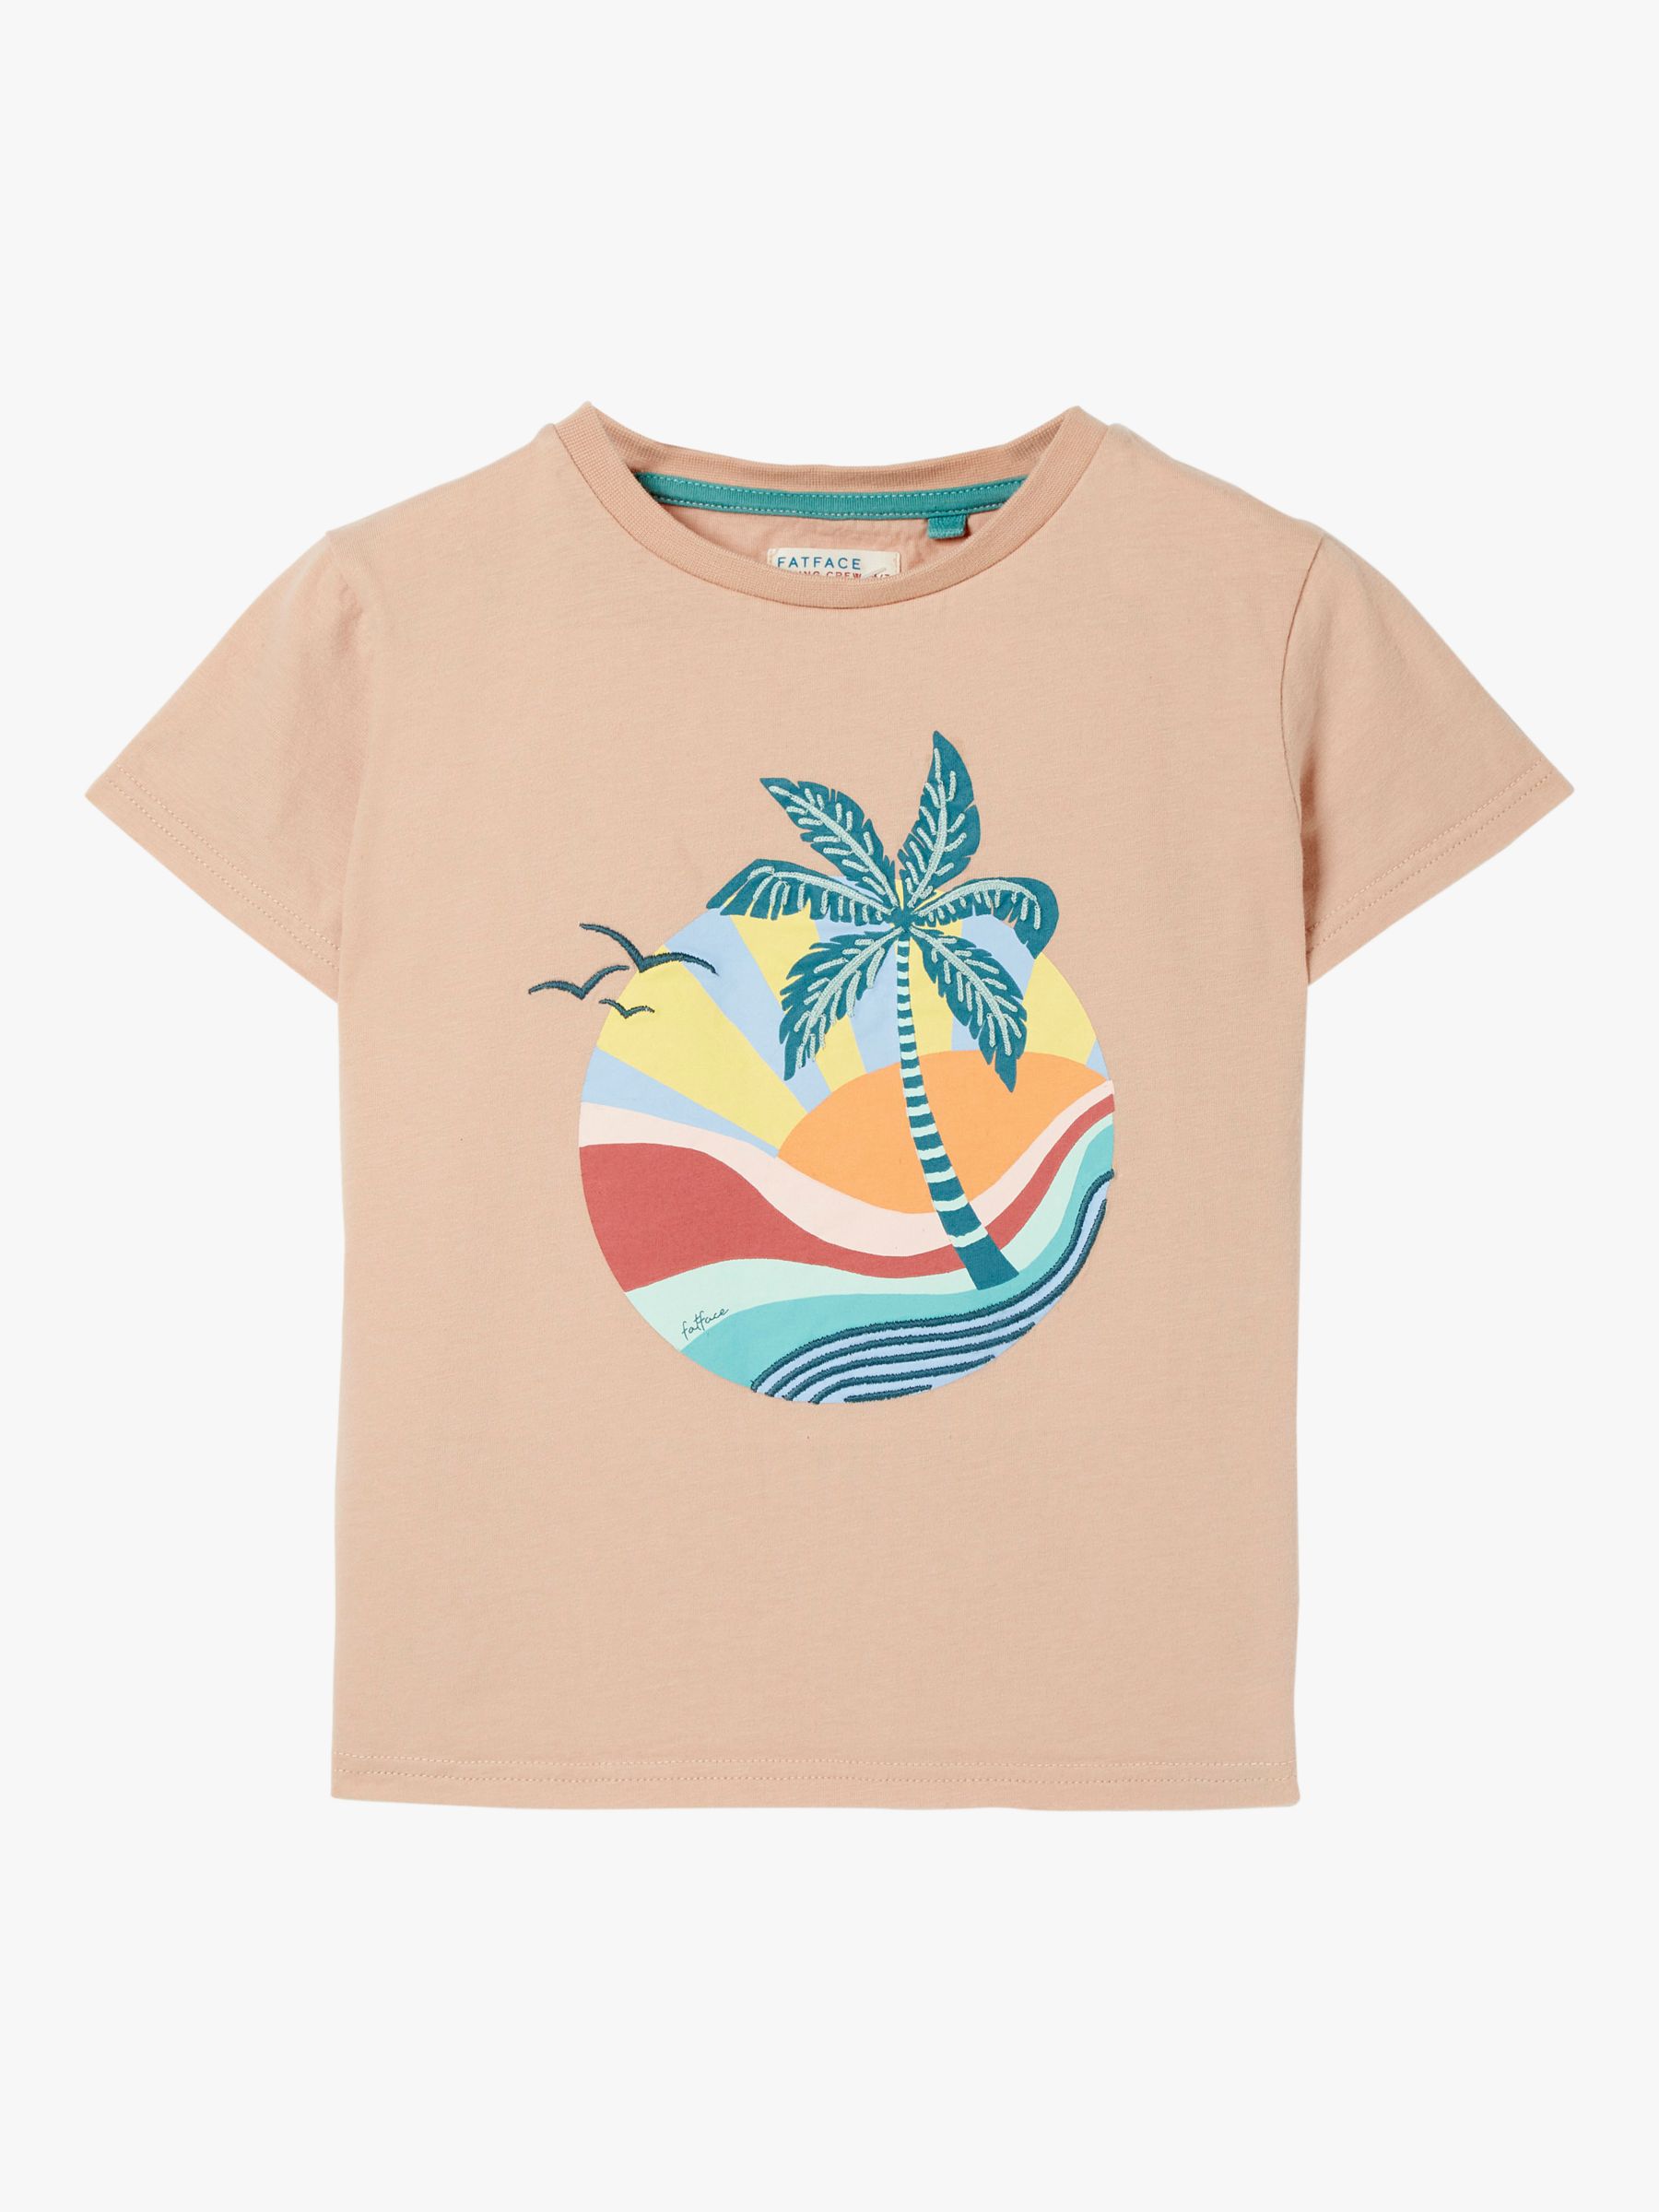 FatFace Kids' Cotton Relaxed Fit Palm Tree T-Shirt, Pale Pink